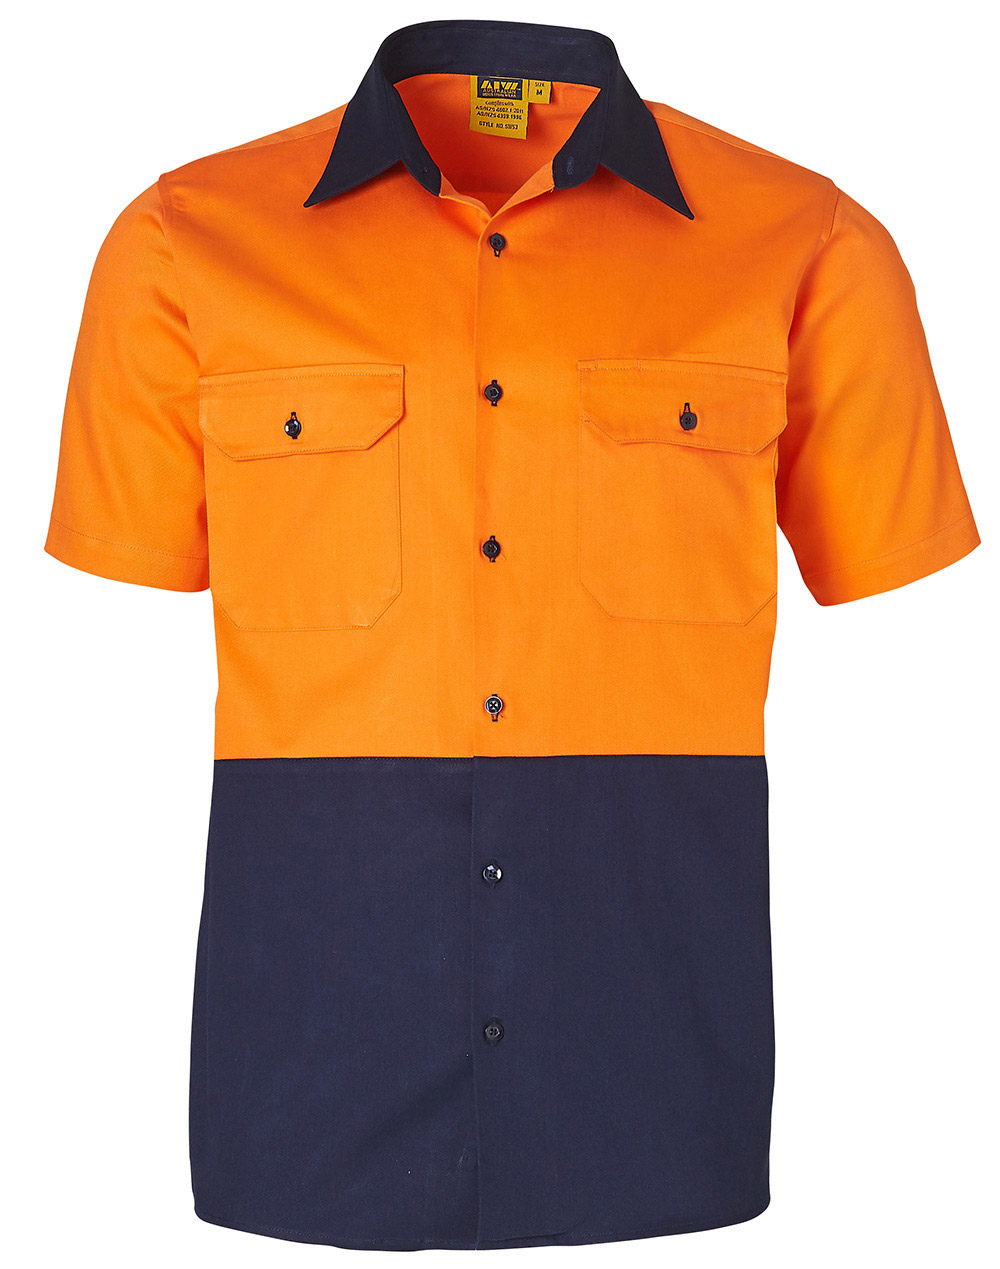 SW53 COTTON DRILL SAFETY SHIRT